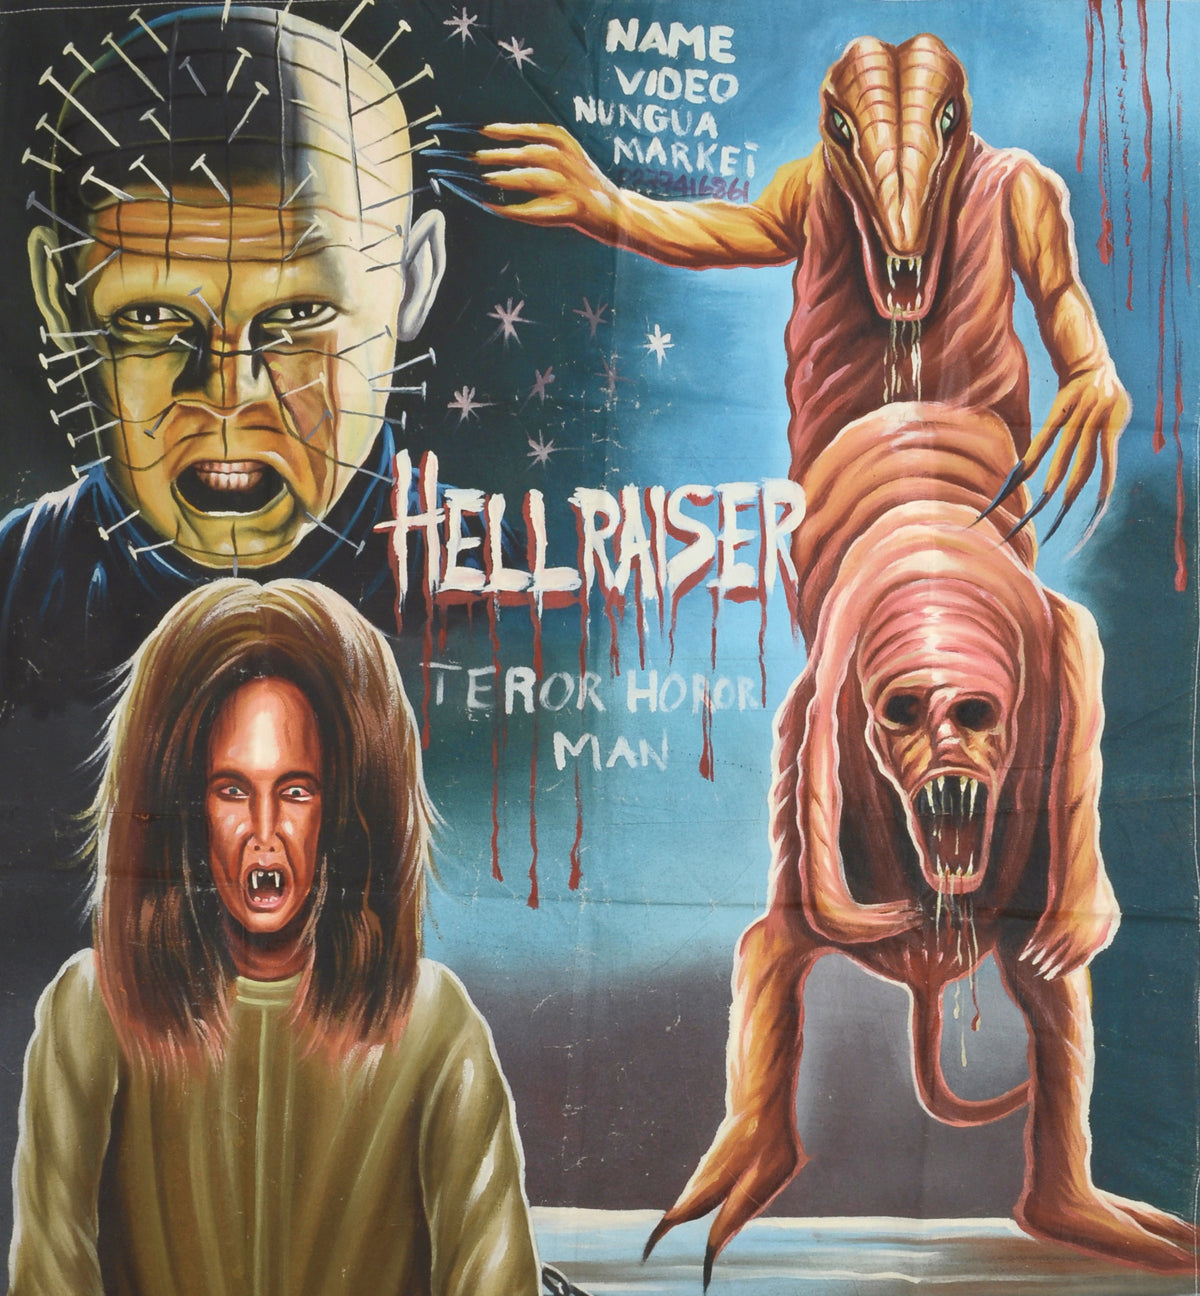 HELLRAISER MOVIE POSTER HAND PAINTED IN GHANA FOR THE LOCAL CINEMA DETAILS